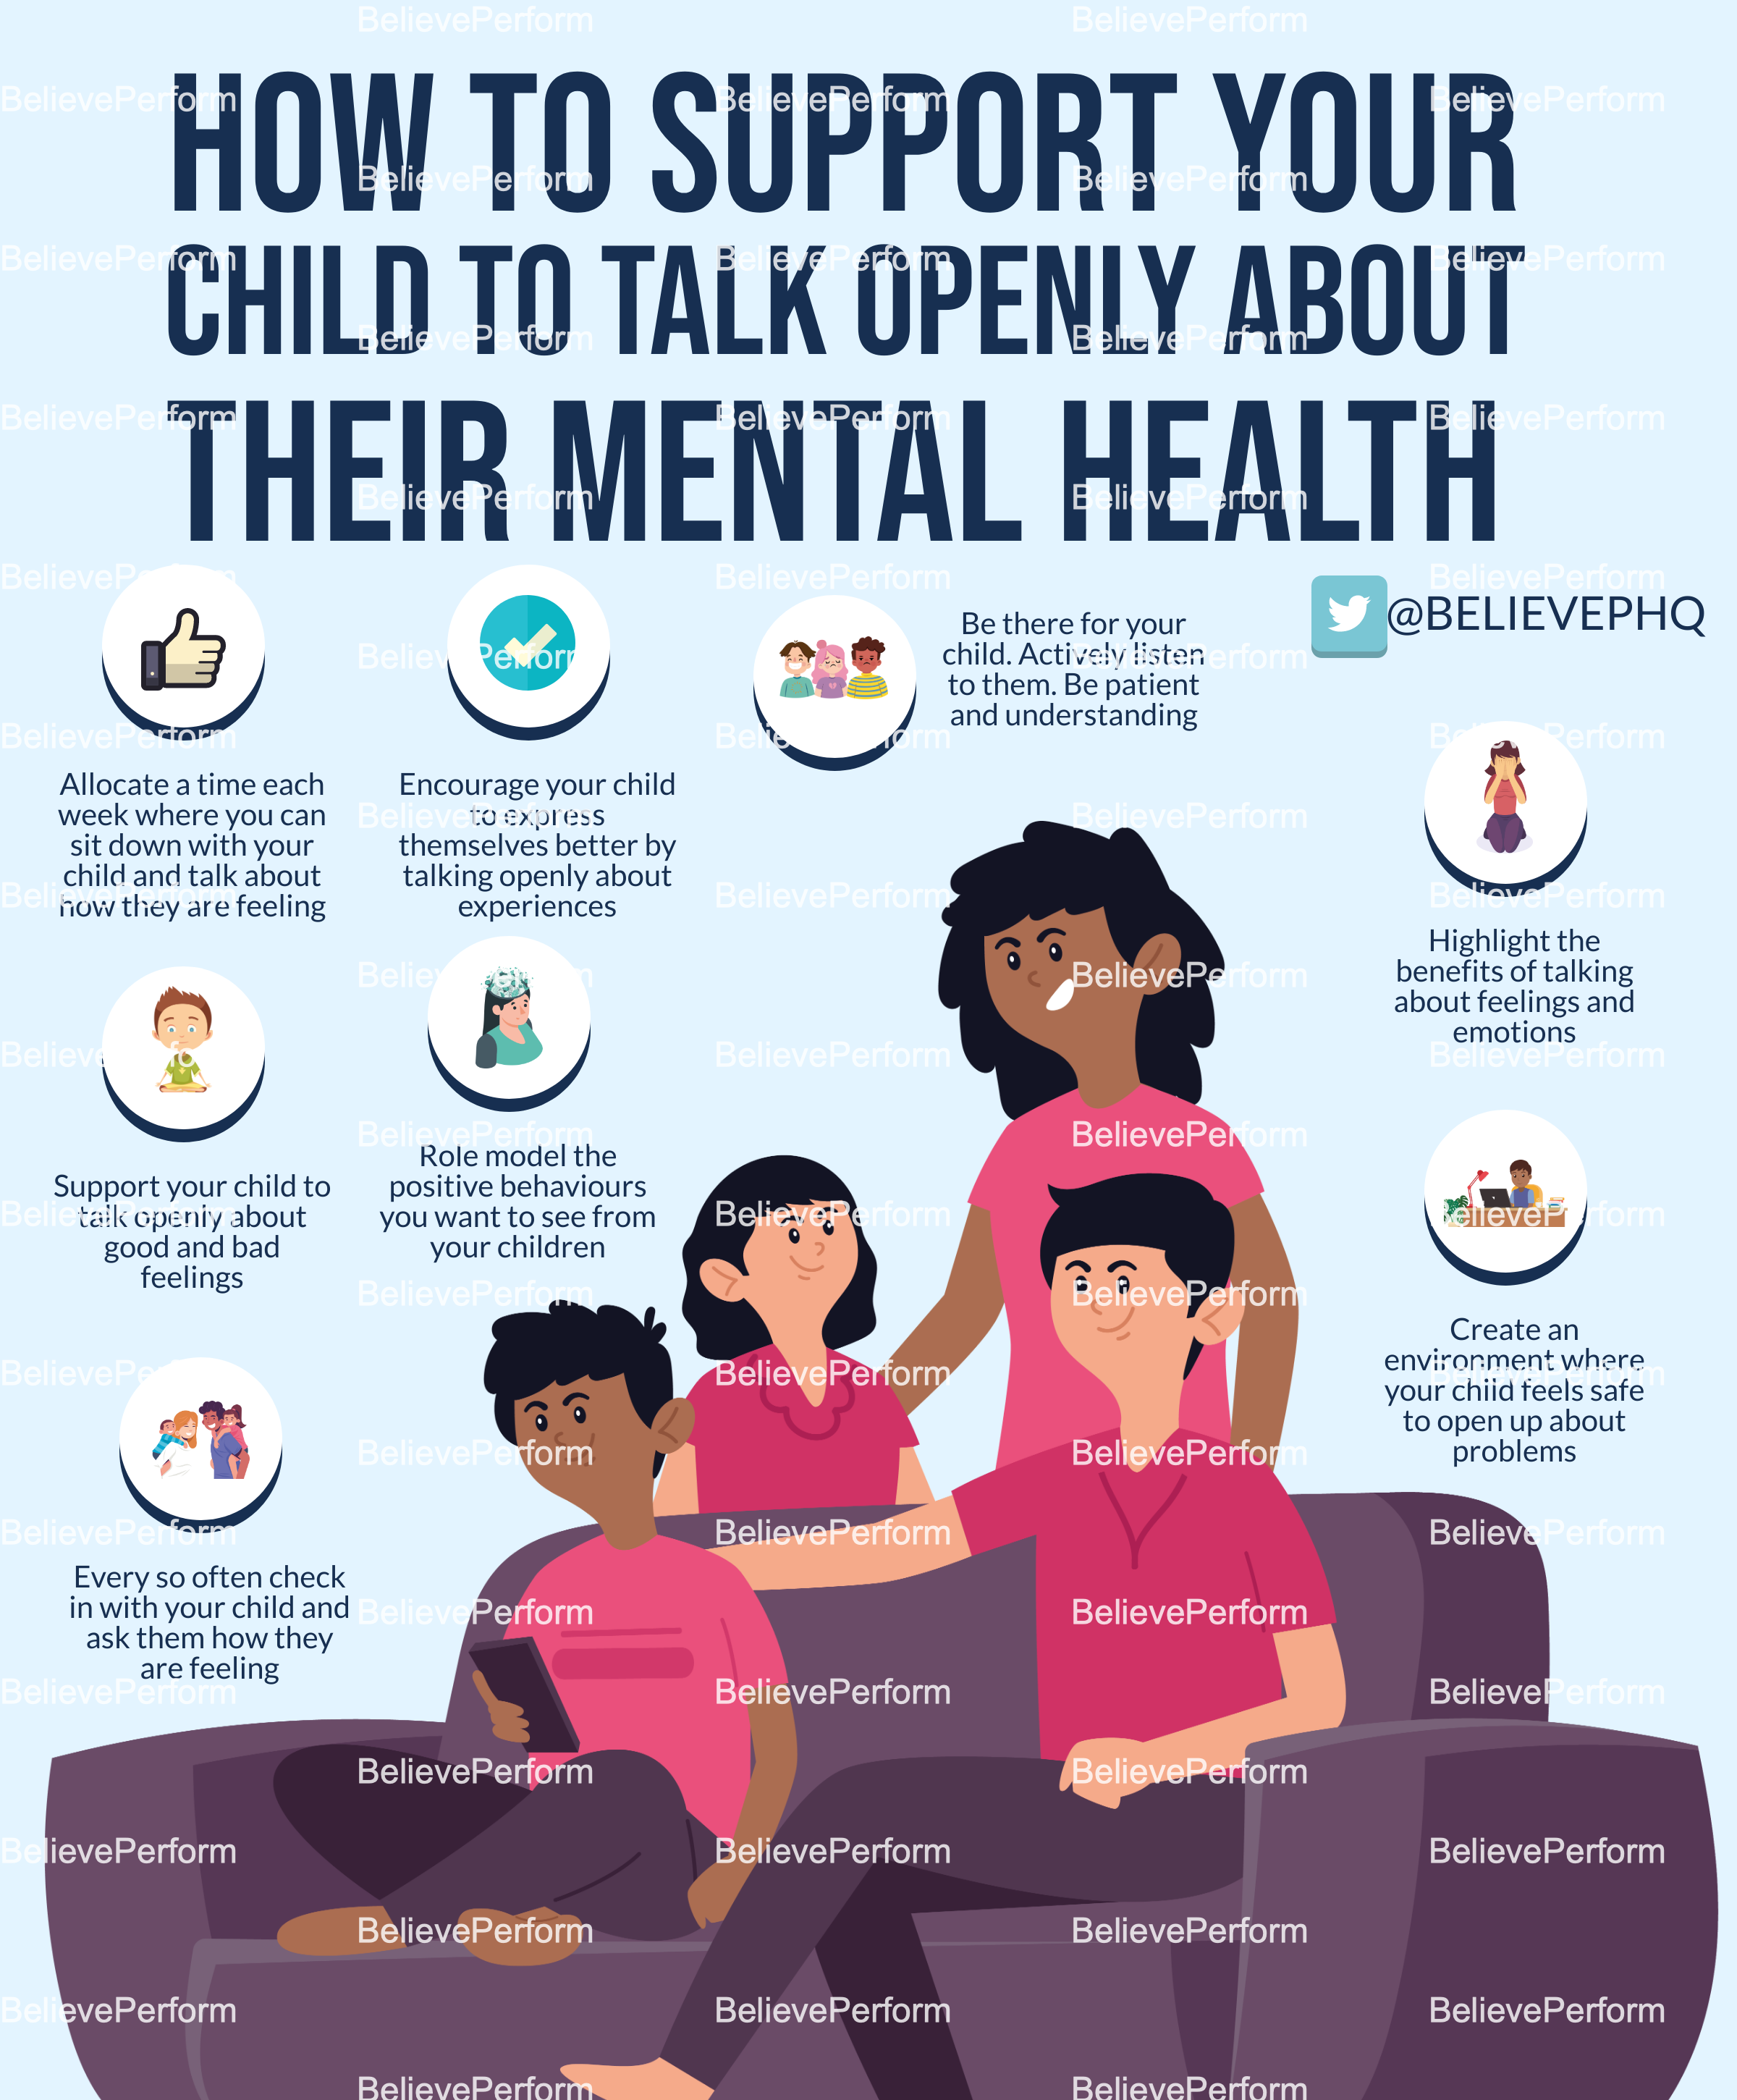 How to support your child to talk openly about their